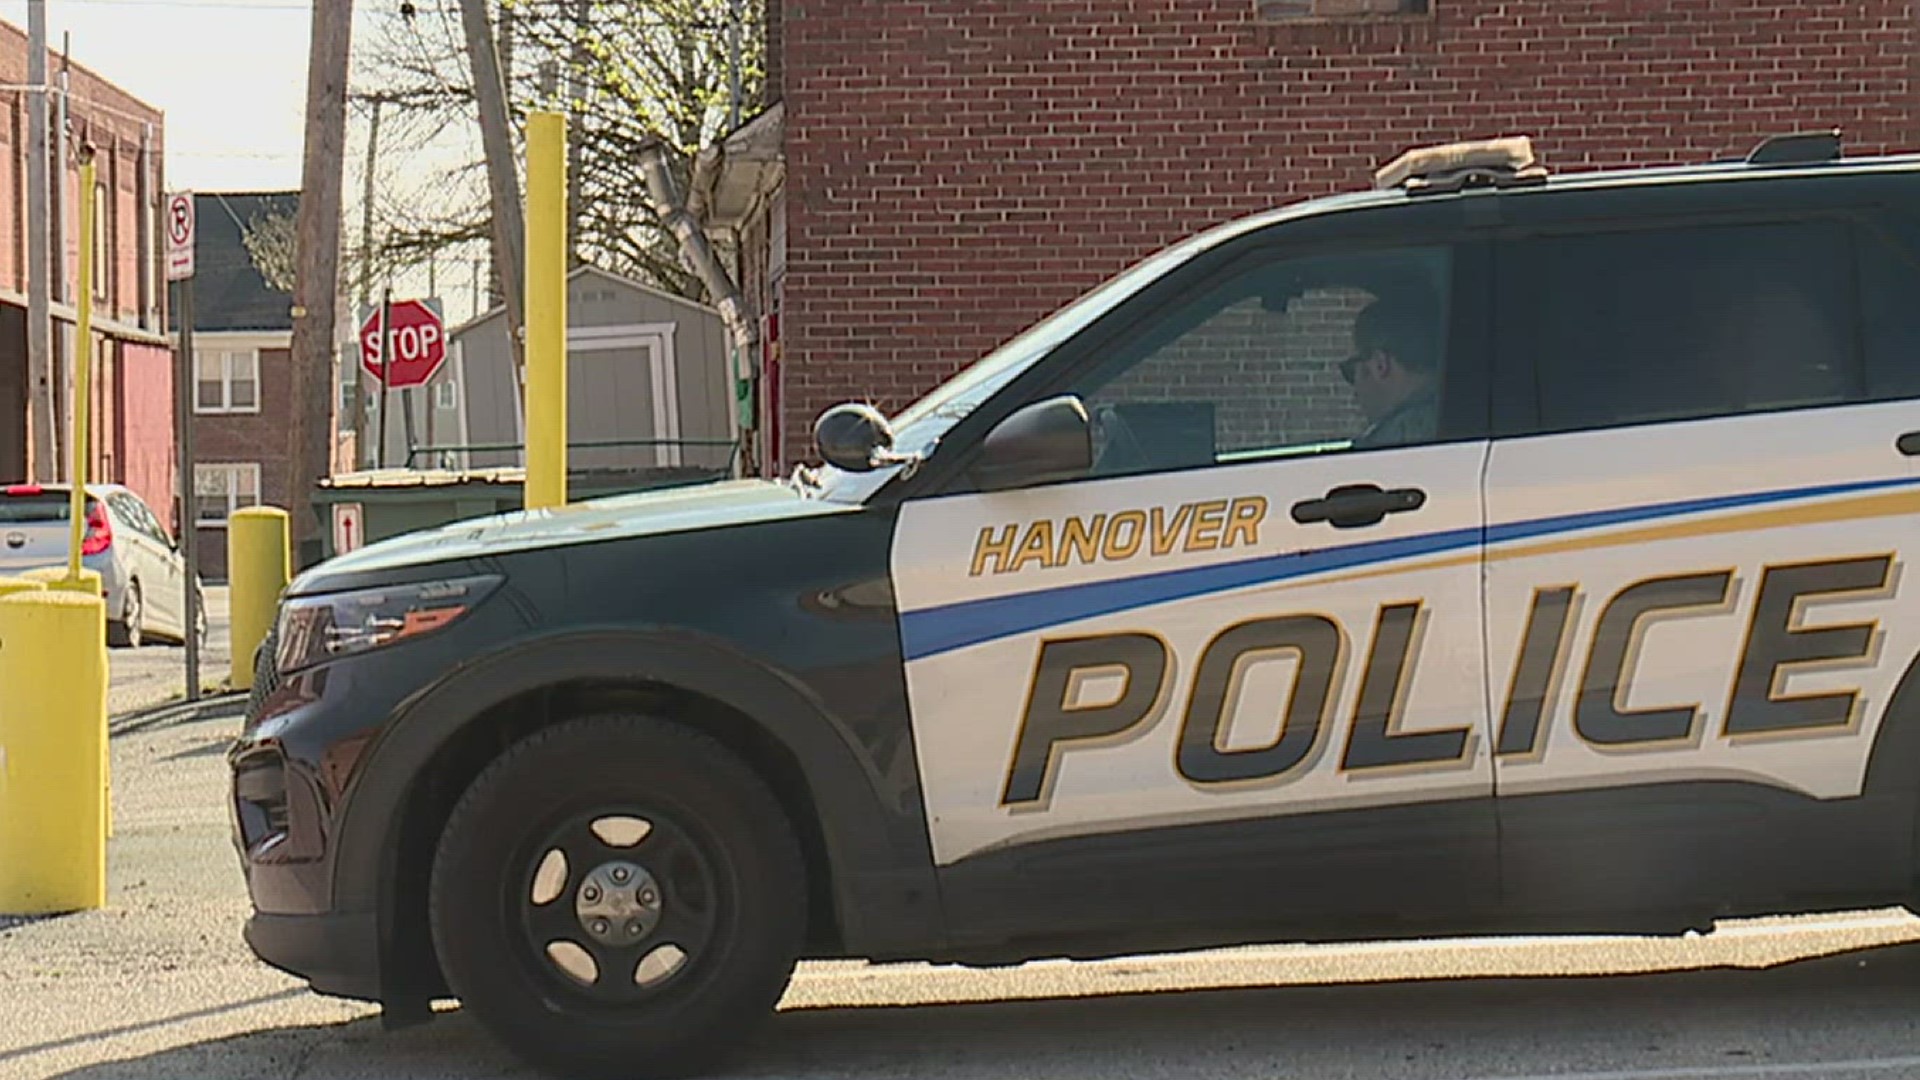 Since March 10, six vehicles have been stolen and several other cars broken into, according to Hanover Police.